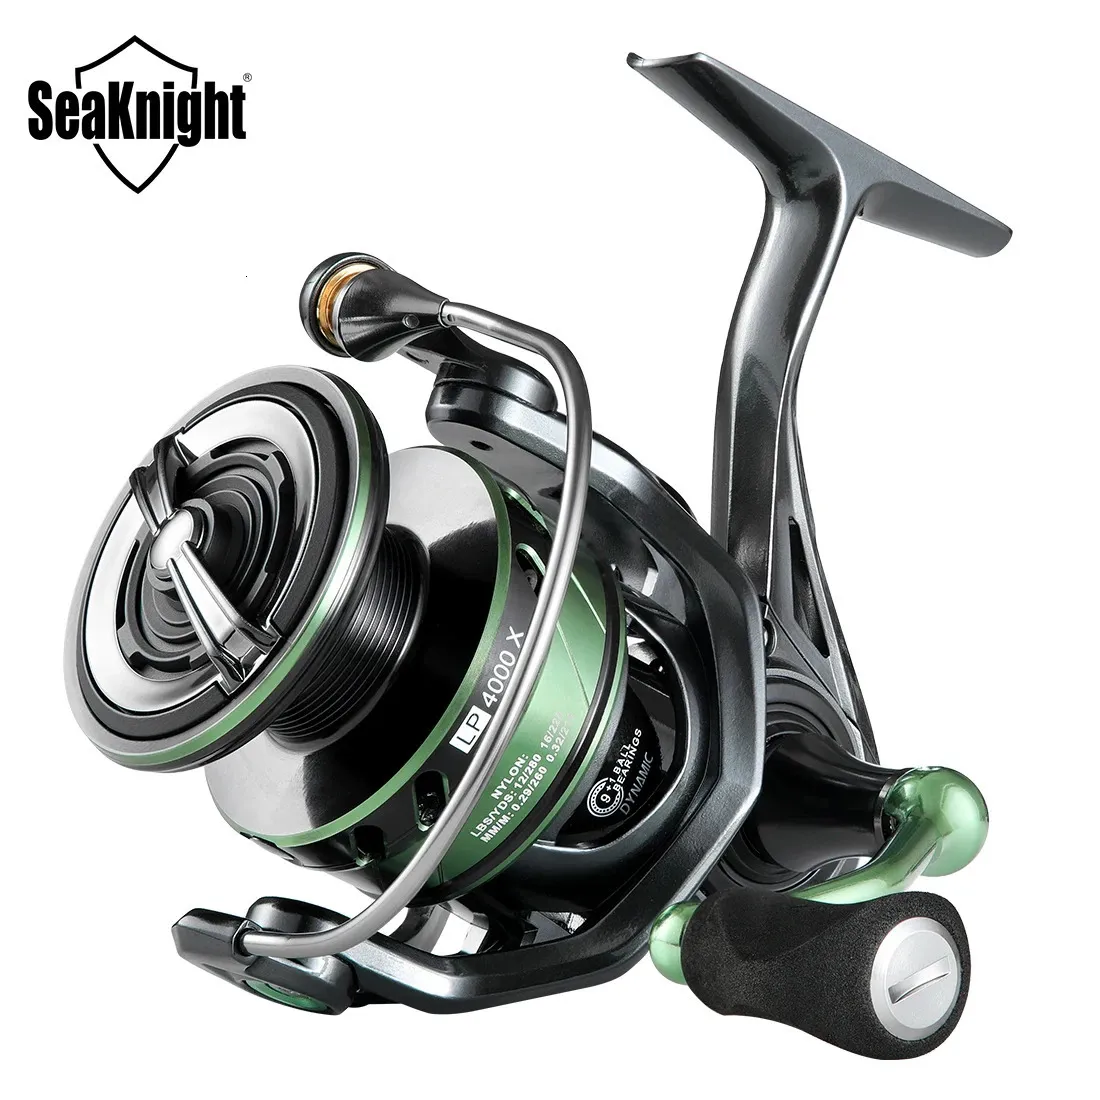 SeaKnight Brand WR III X Series Fishing Reels 5.2 1 Durable Gear MAX Drag  28lb Smoother Winding Spinning Fishing Reel WR3 X 240123 From Dao06, $31.98